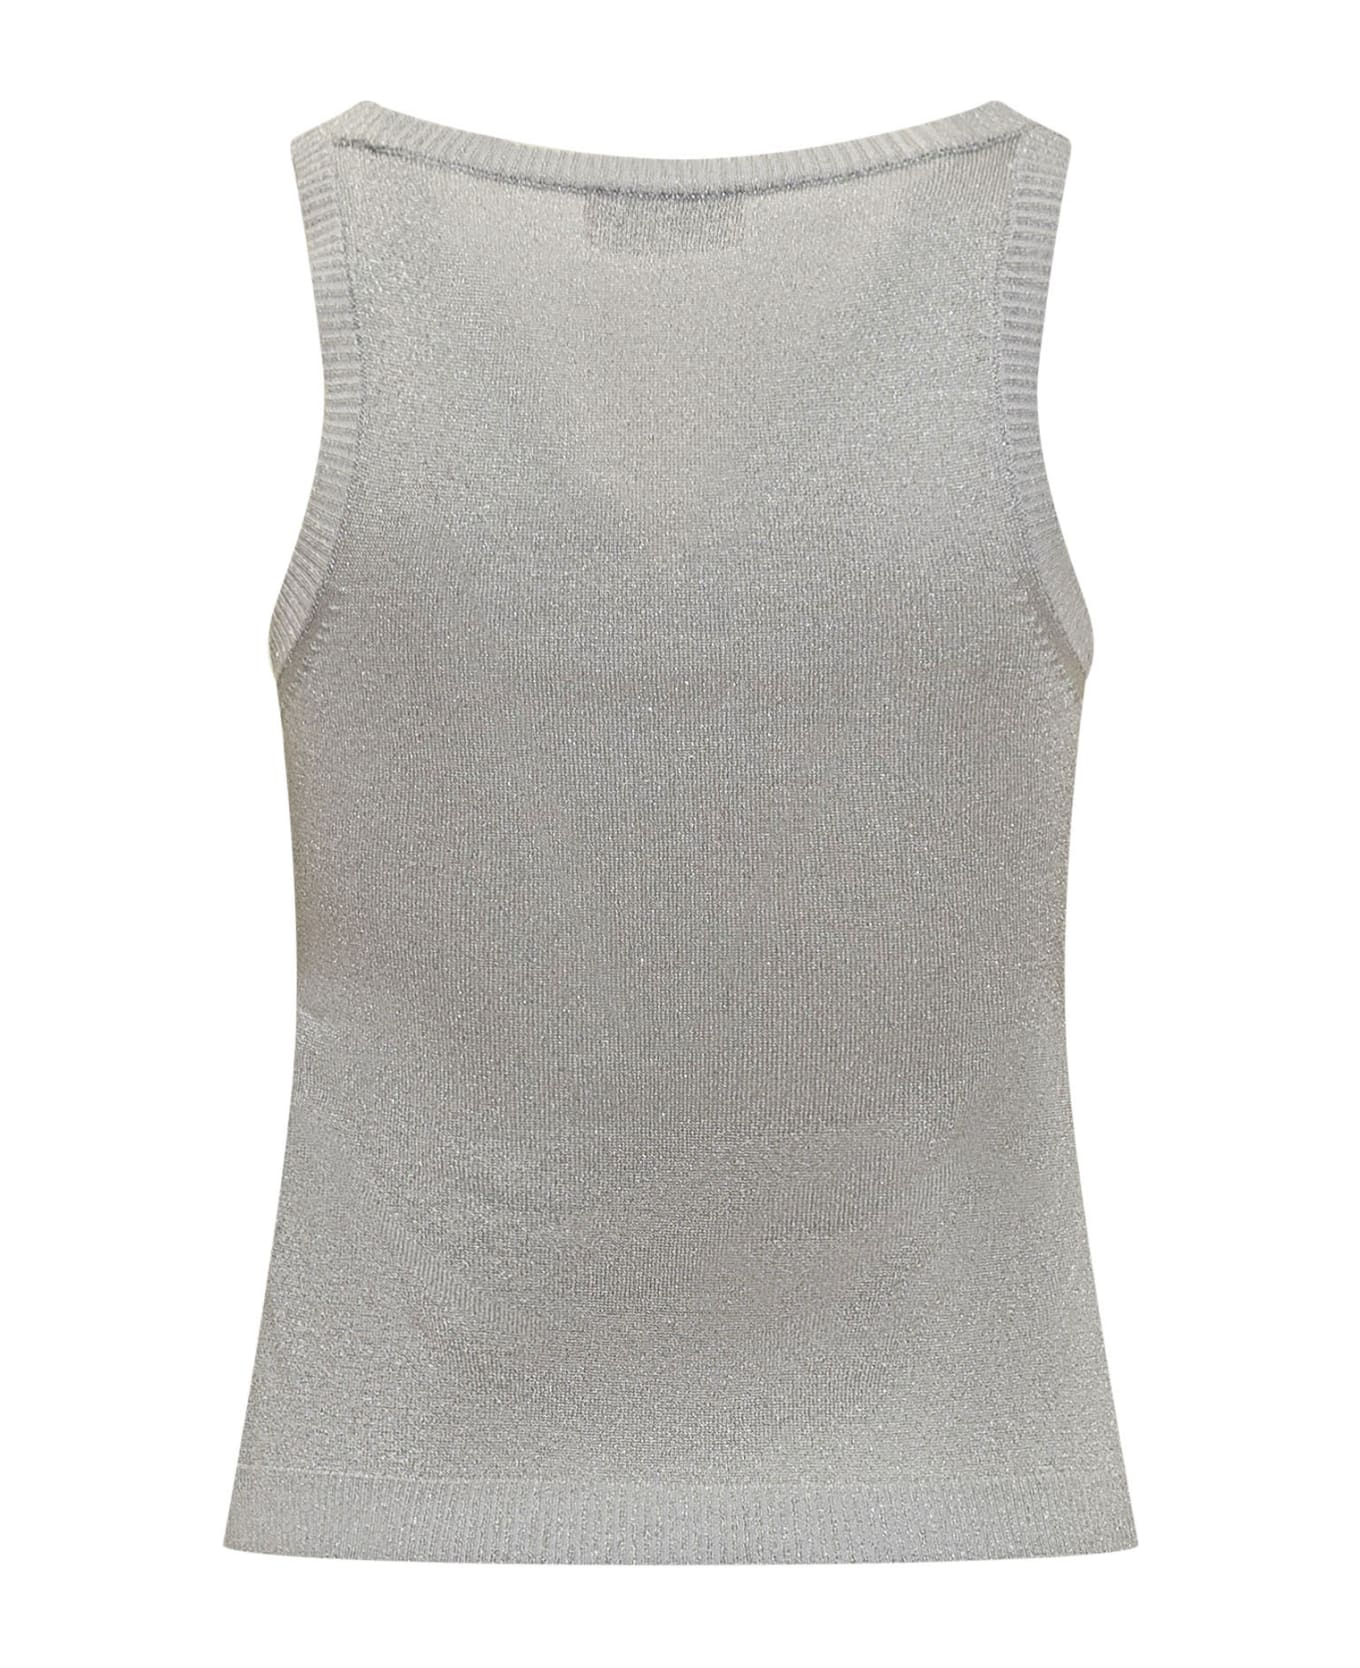 Missoni Viscose Tank Top With Metalized Filaments - SILVER タンクトップ